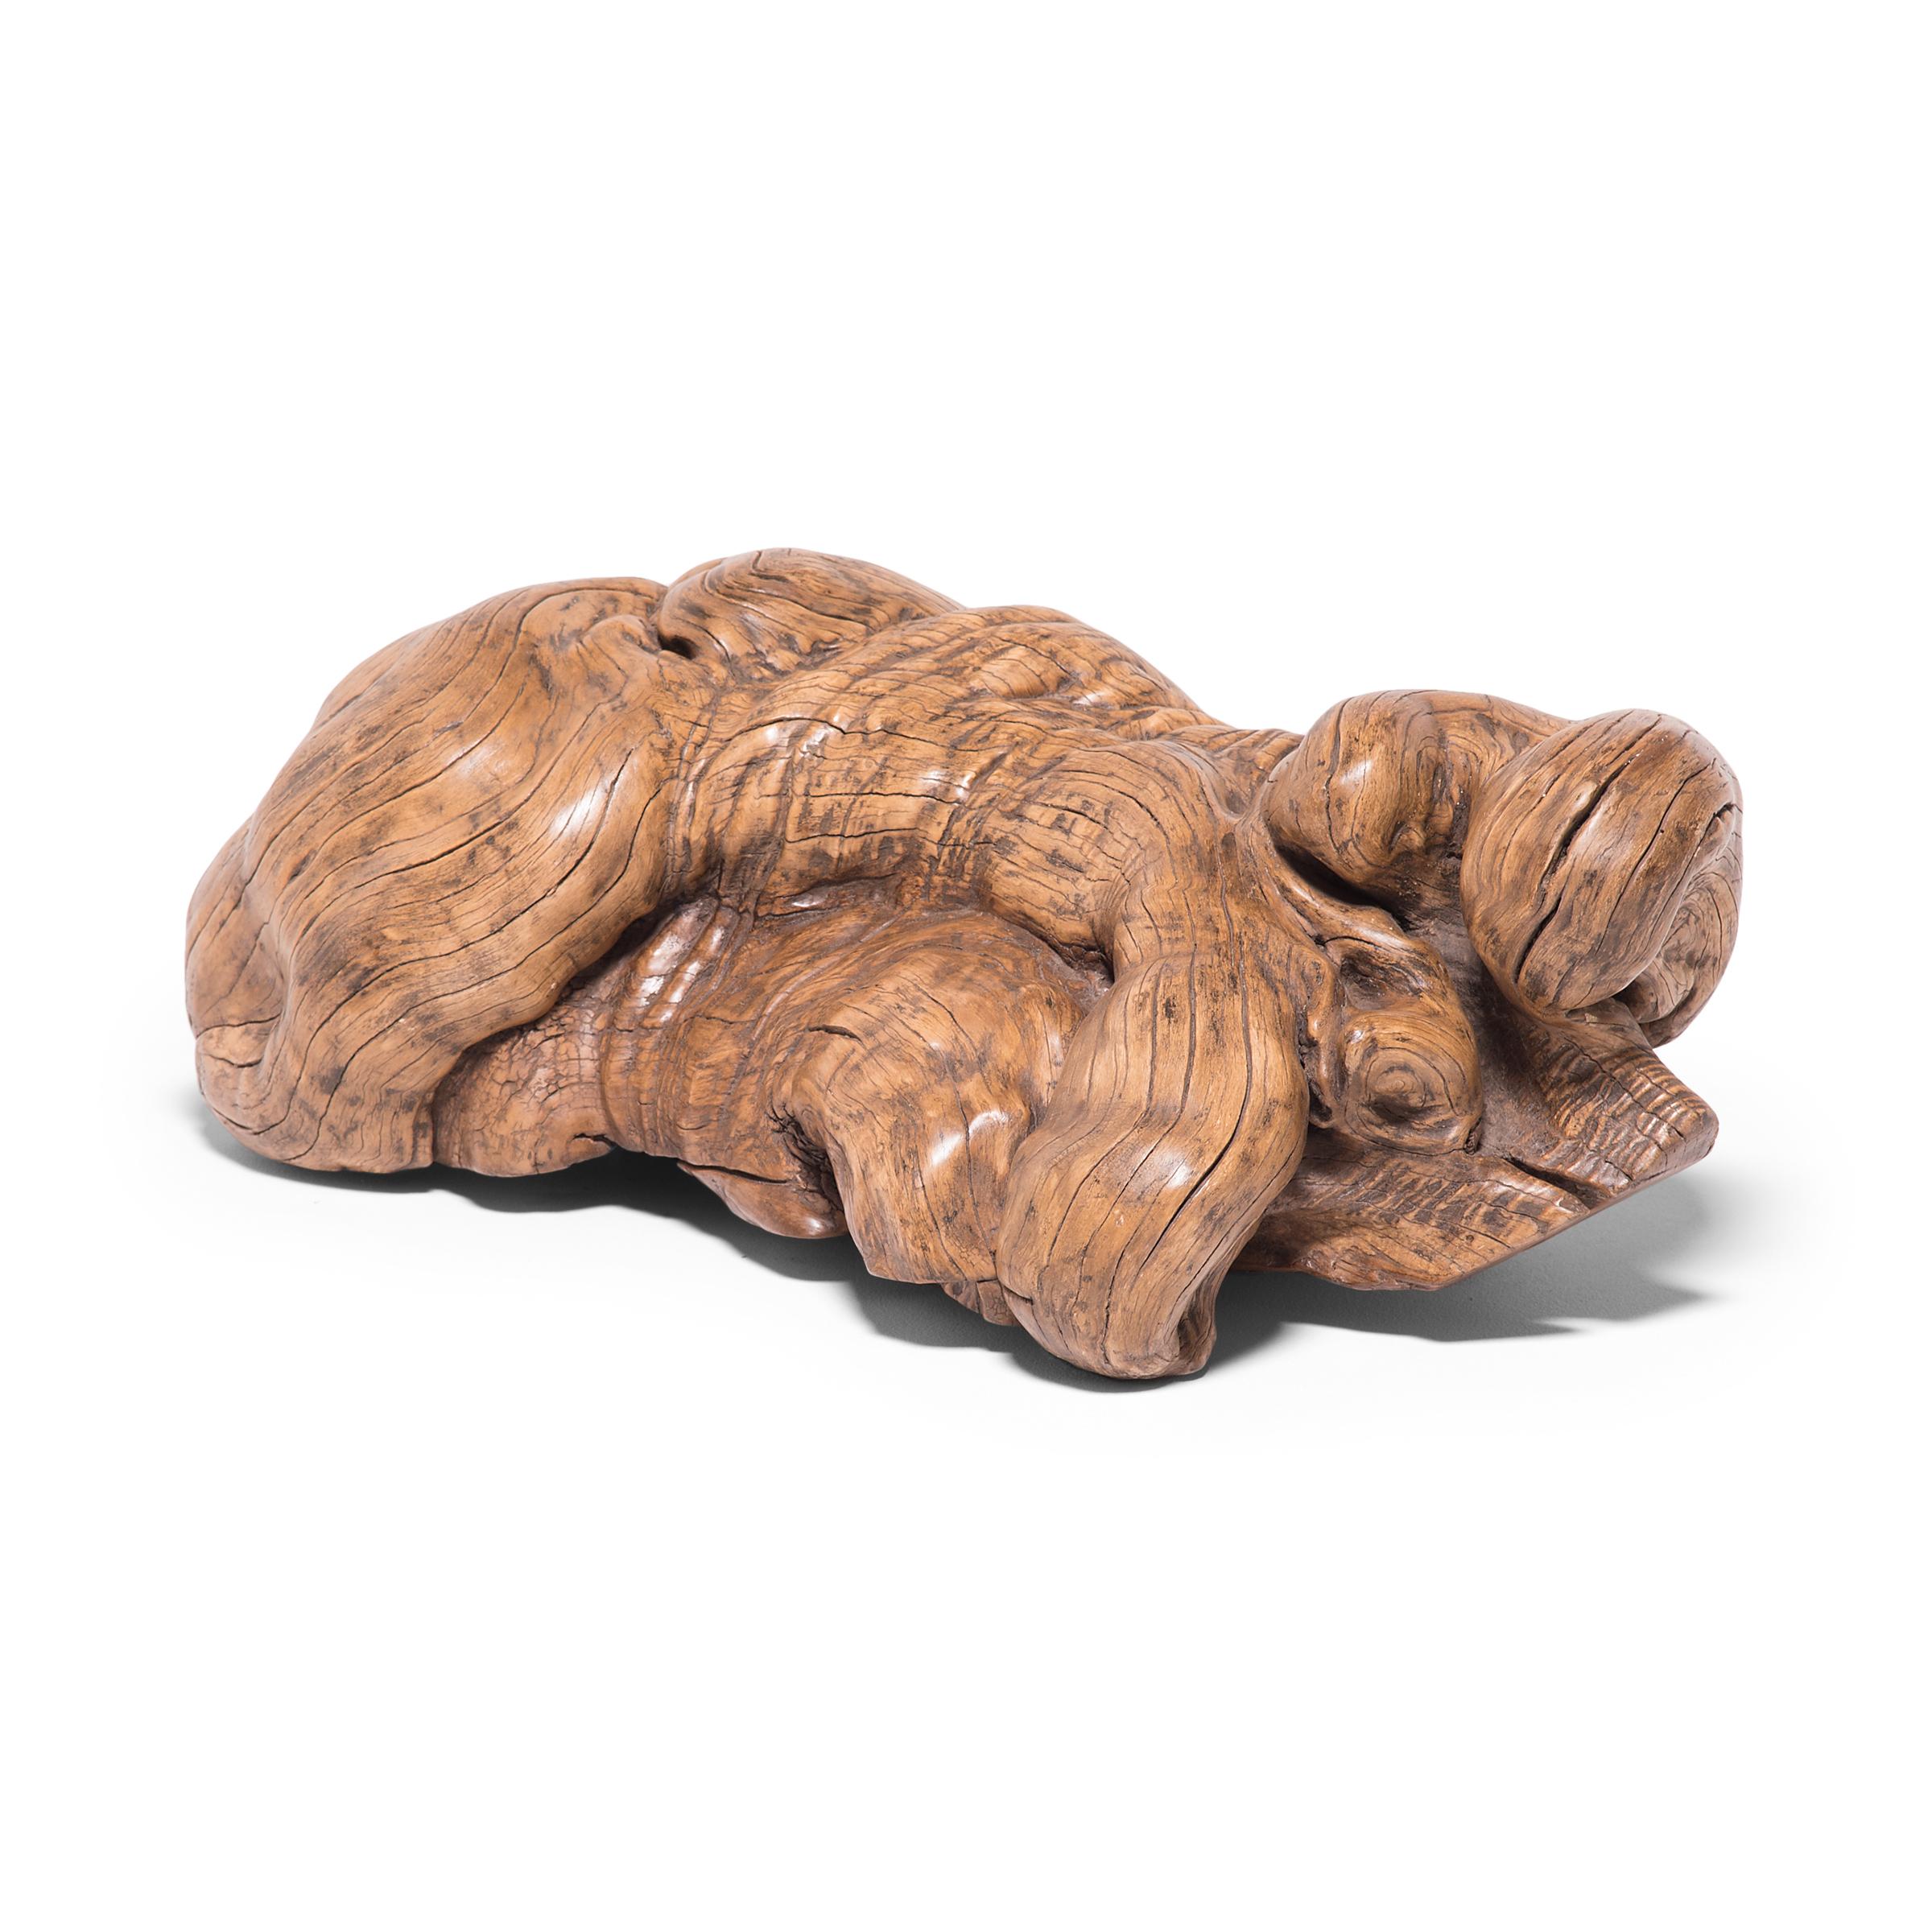 The unique formation of this early 19th century Chinese scholars' root sculpture brings to mind a mythical creature relaxing in a reclined posture. This type of natural sculpture is characterized as a 